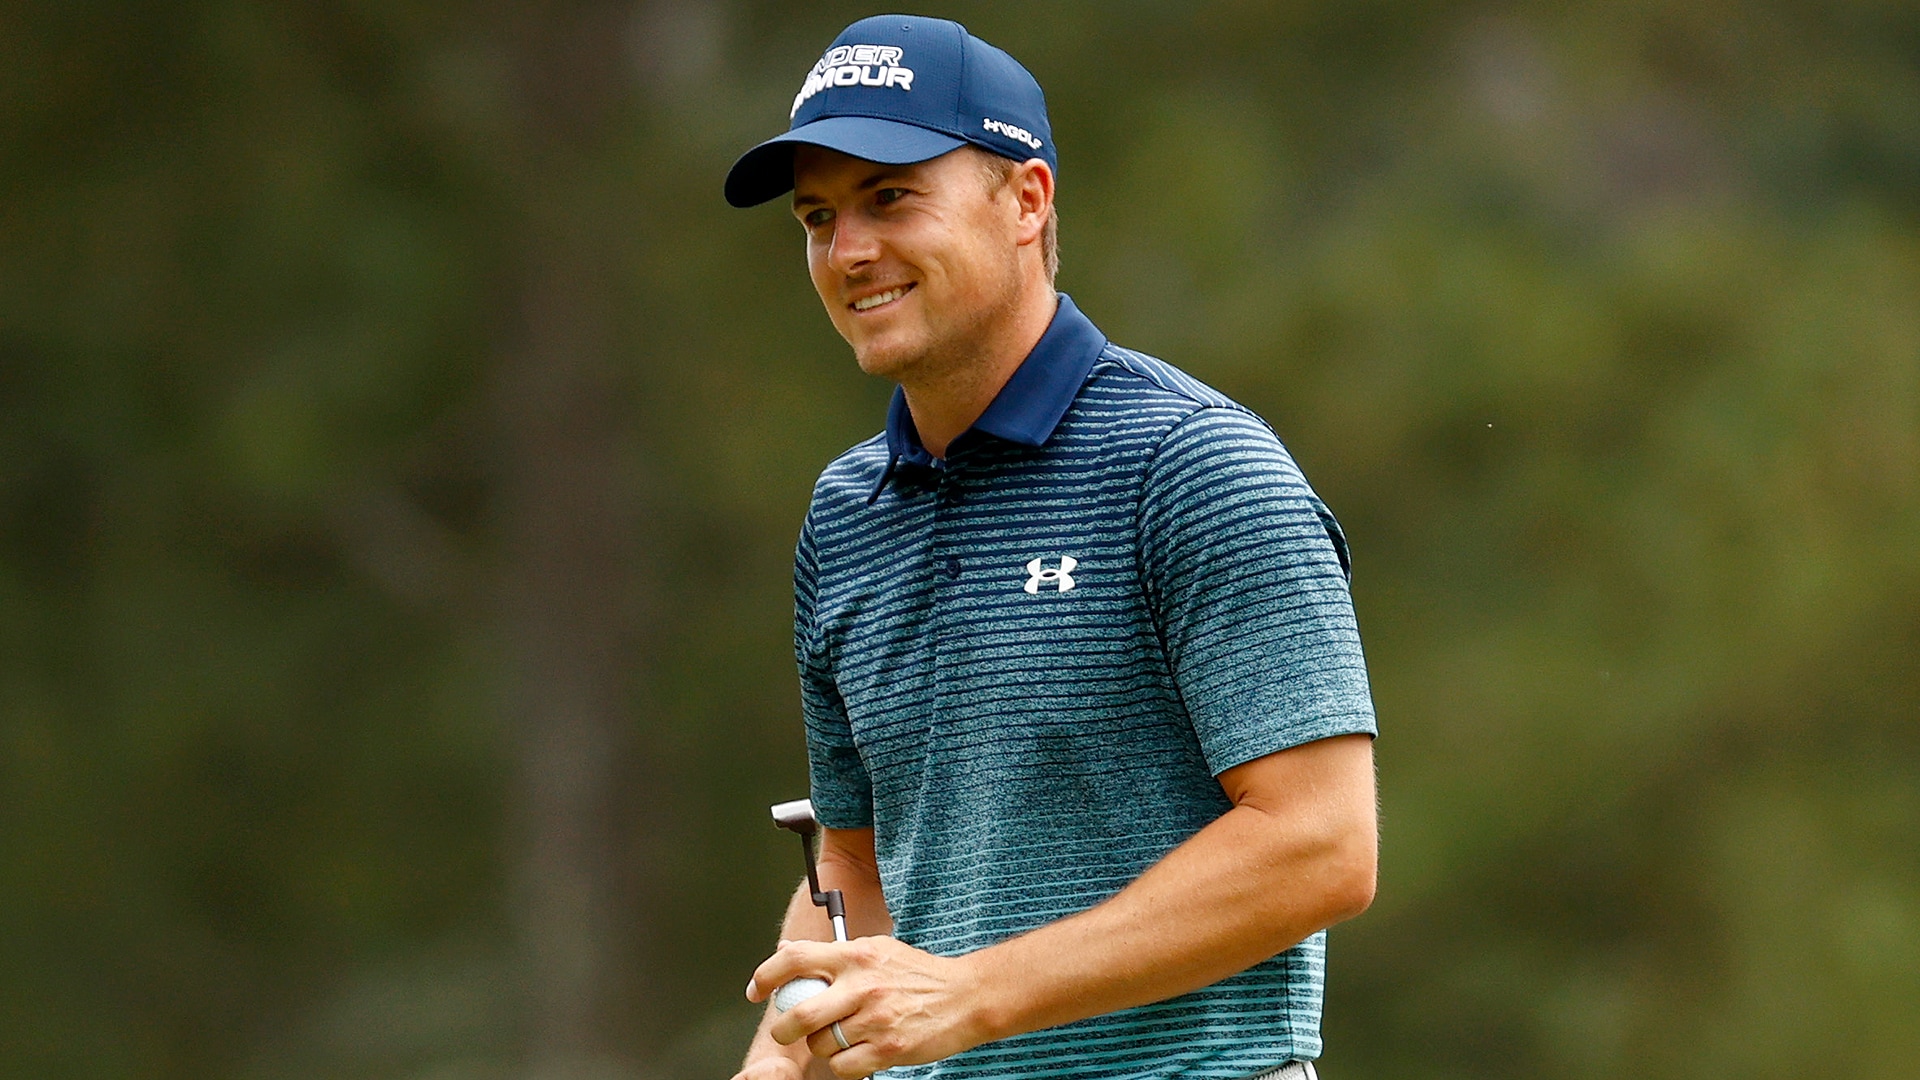 A triple bogey and a 'lucky' eagle part of Jordan Spieth's 71 at Masters 2